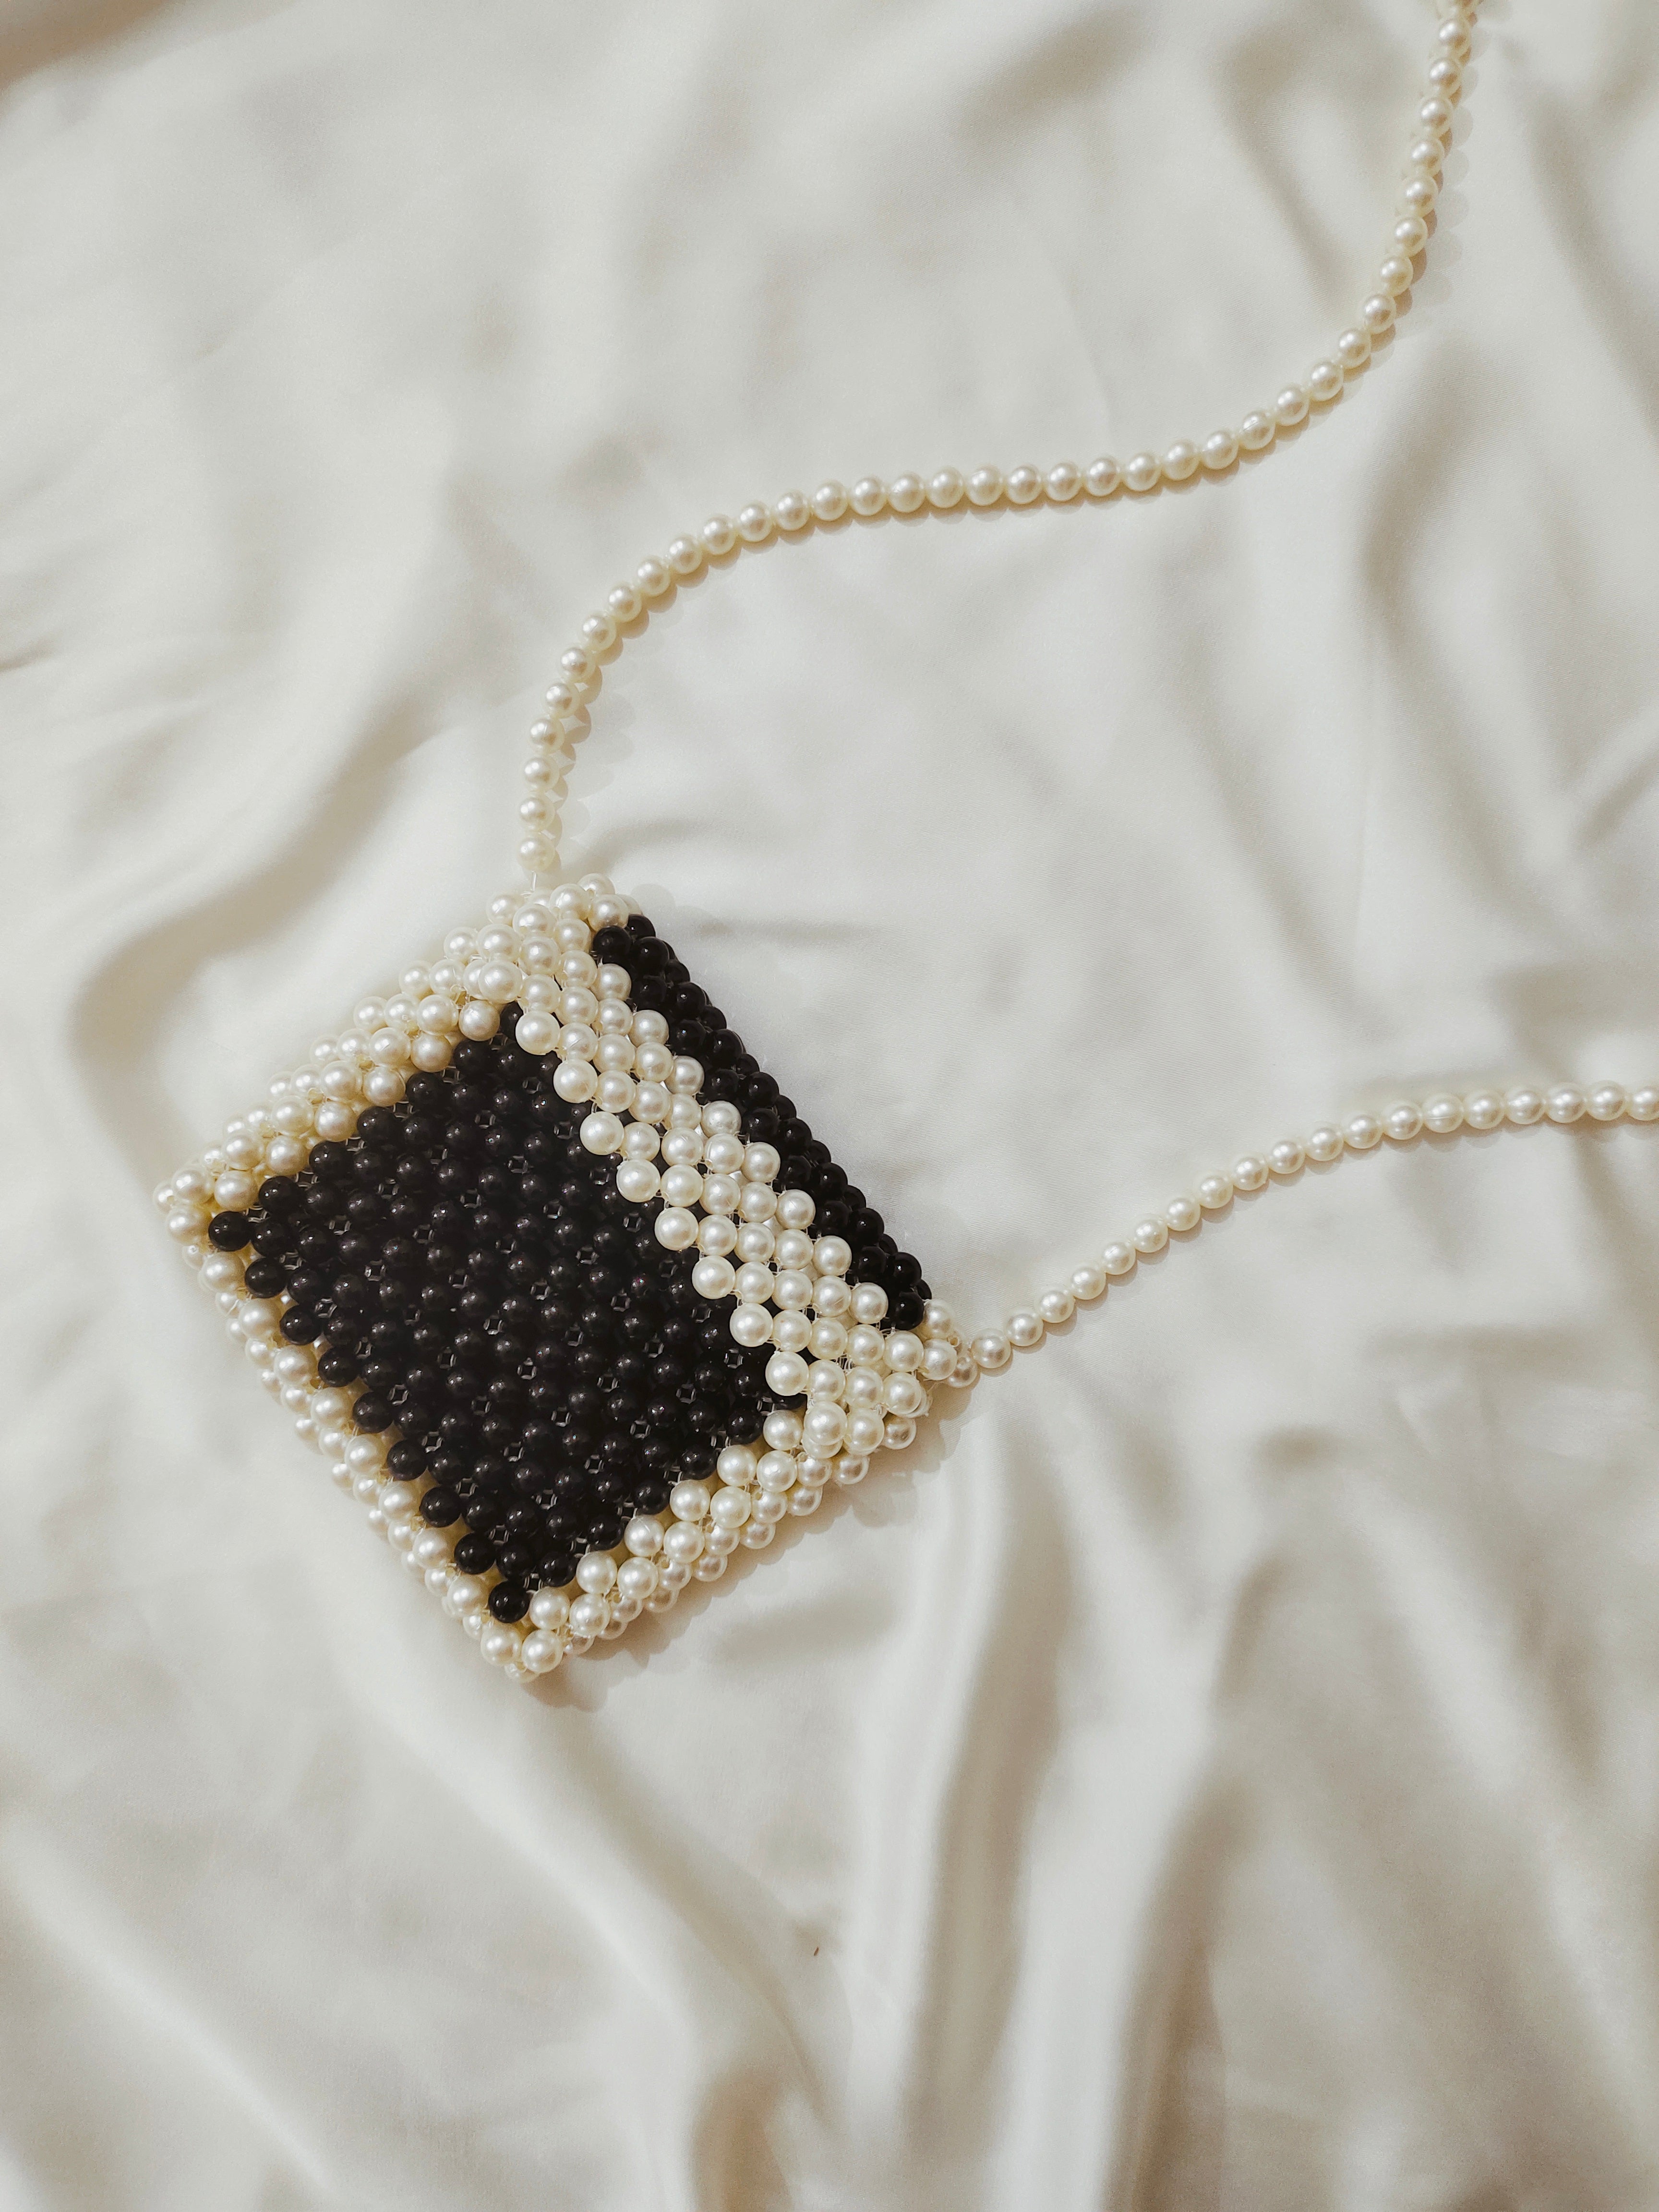 Handcrafted Elegance: White & Black Beaded Cross Body Bag with Beaded strap